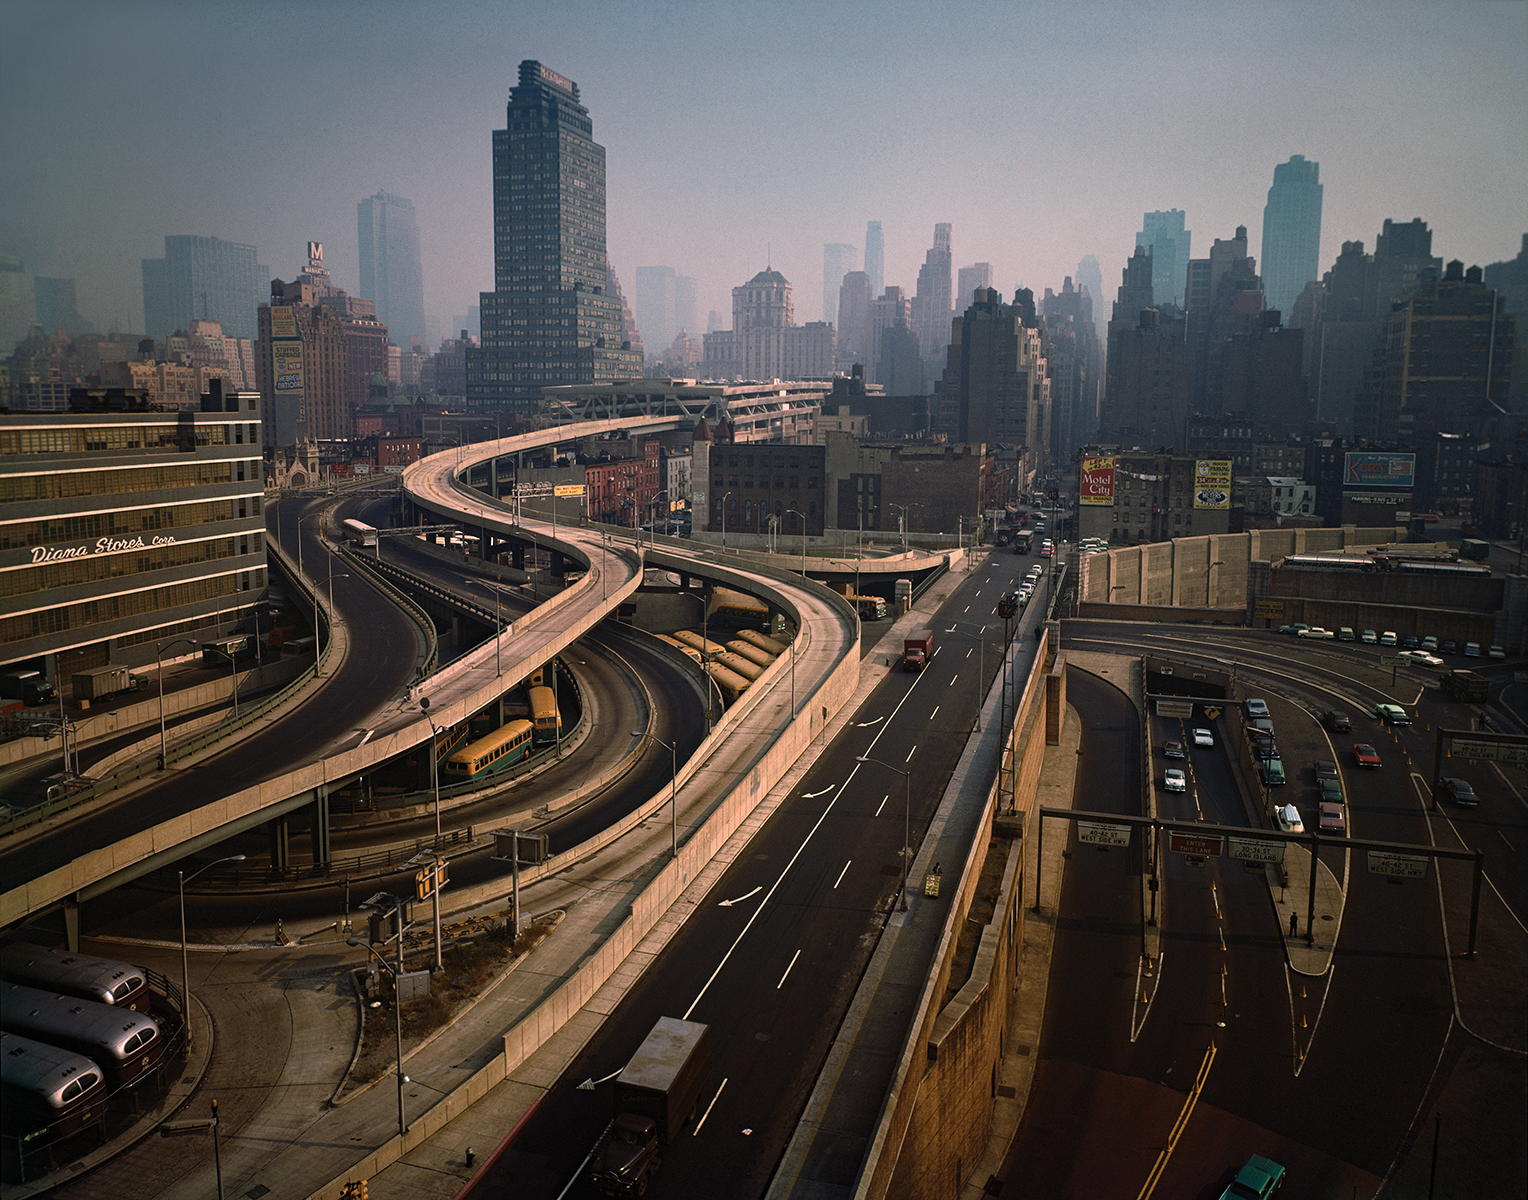 View of highways and interchanges with the Manhattan skyline beyond them.